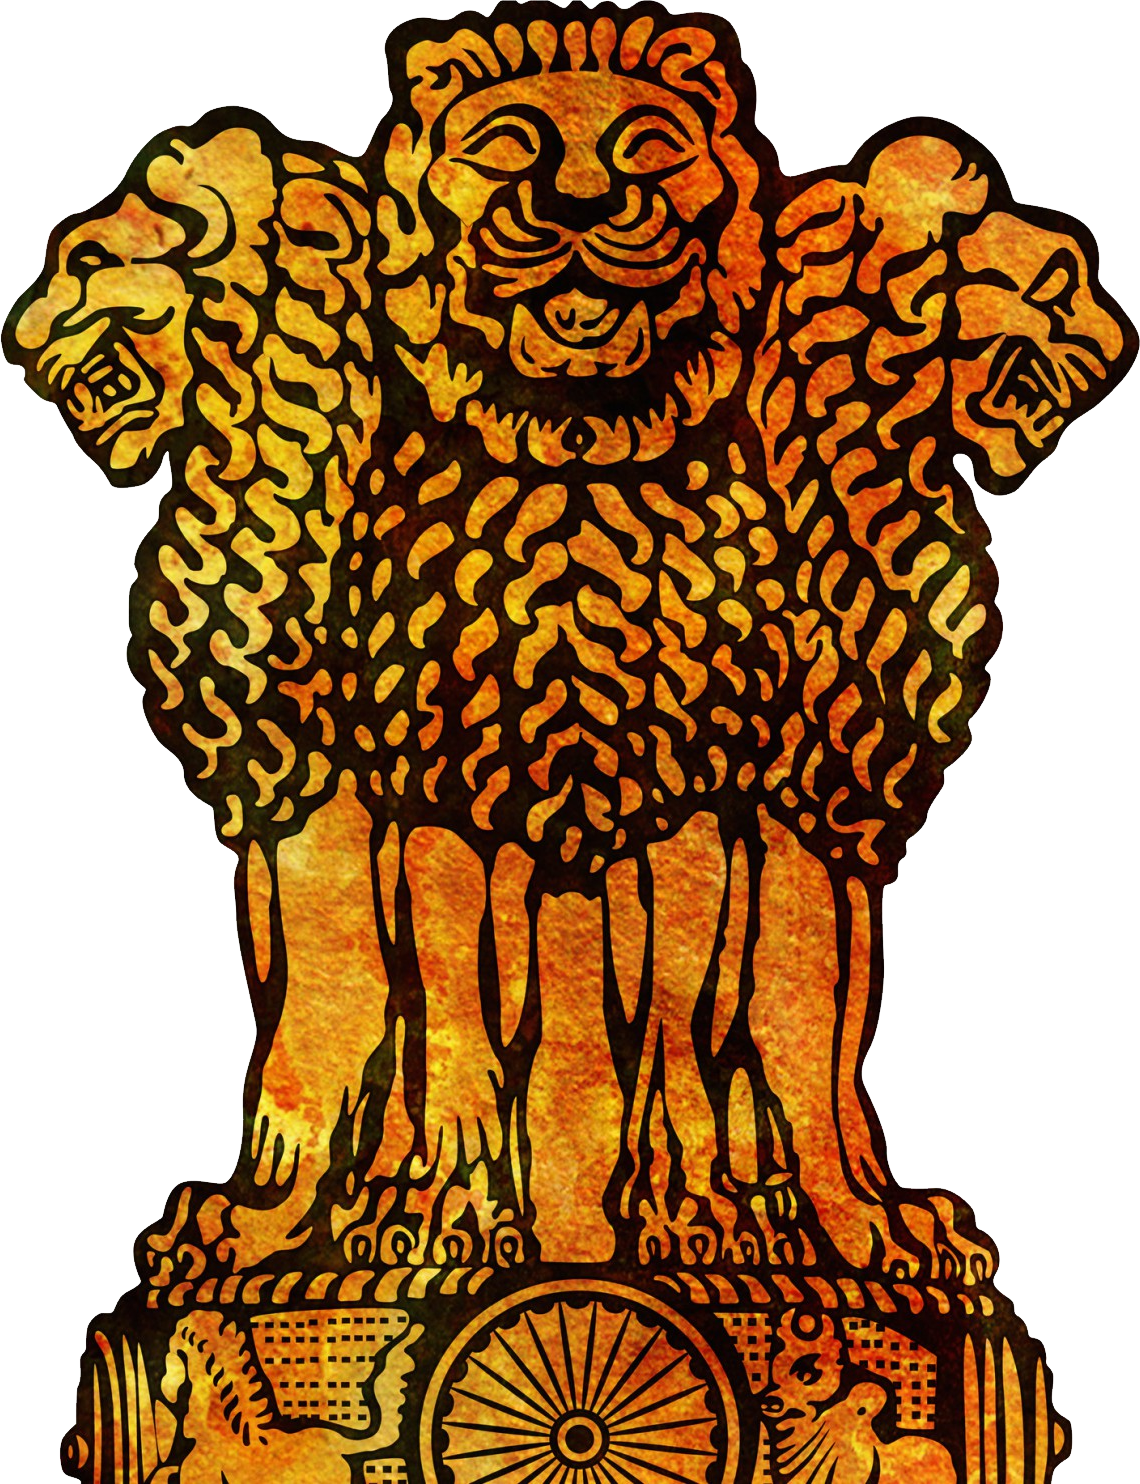 Coat of arms of India PNG image free download